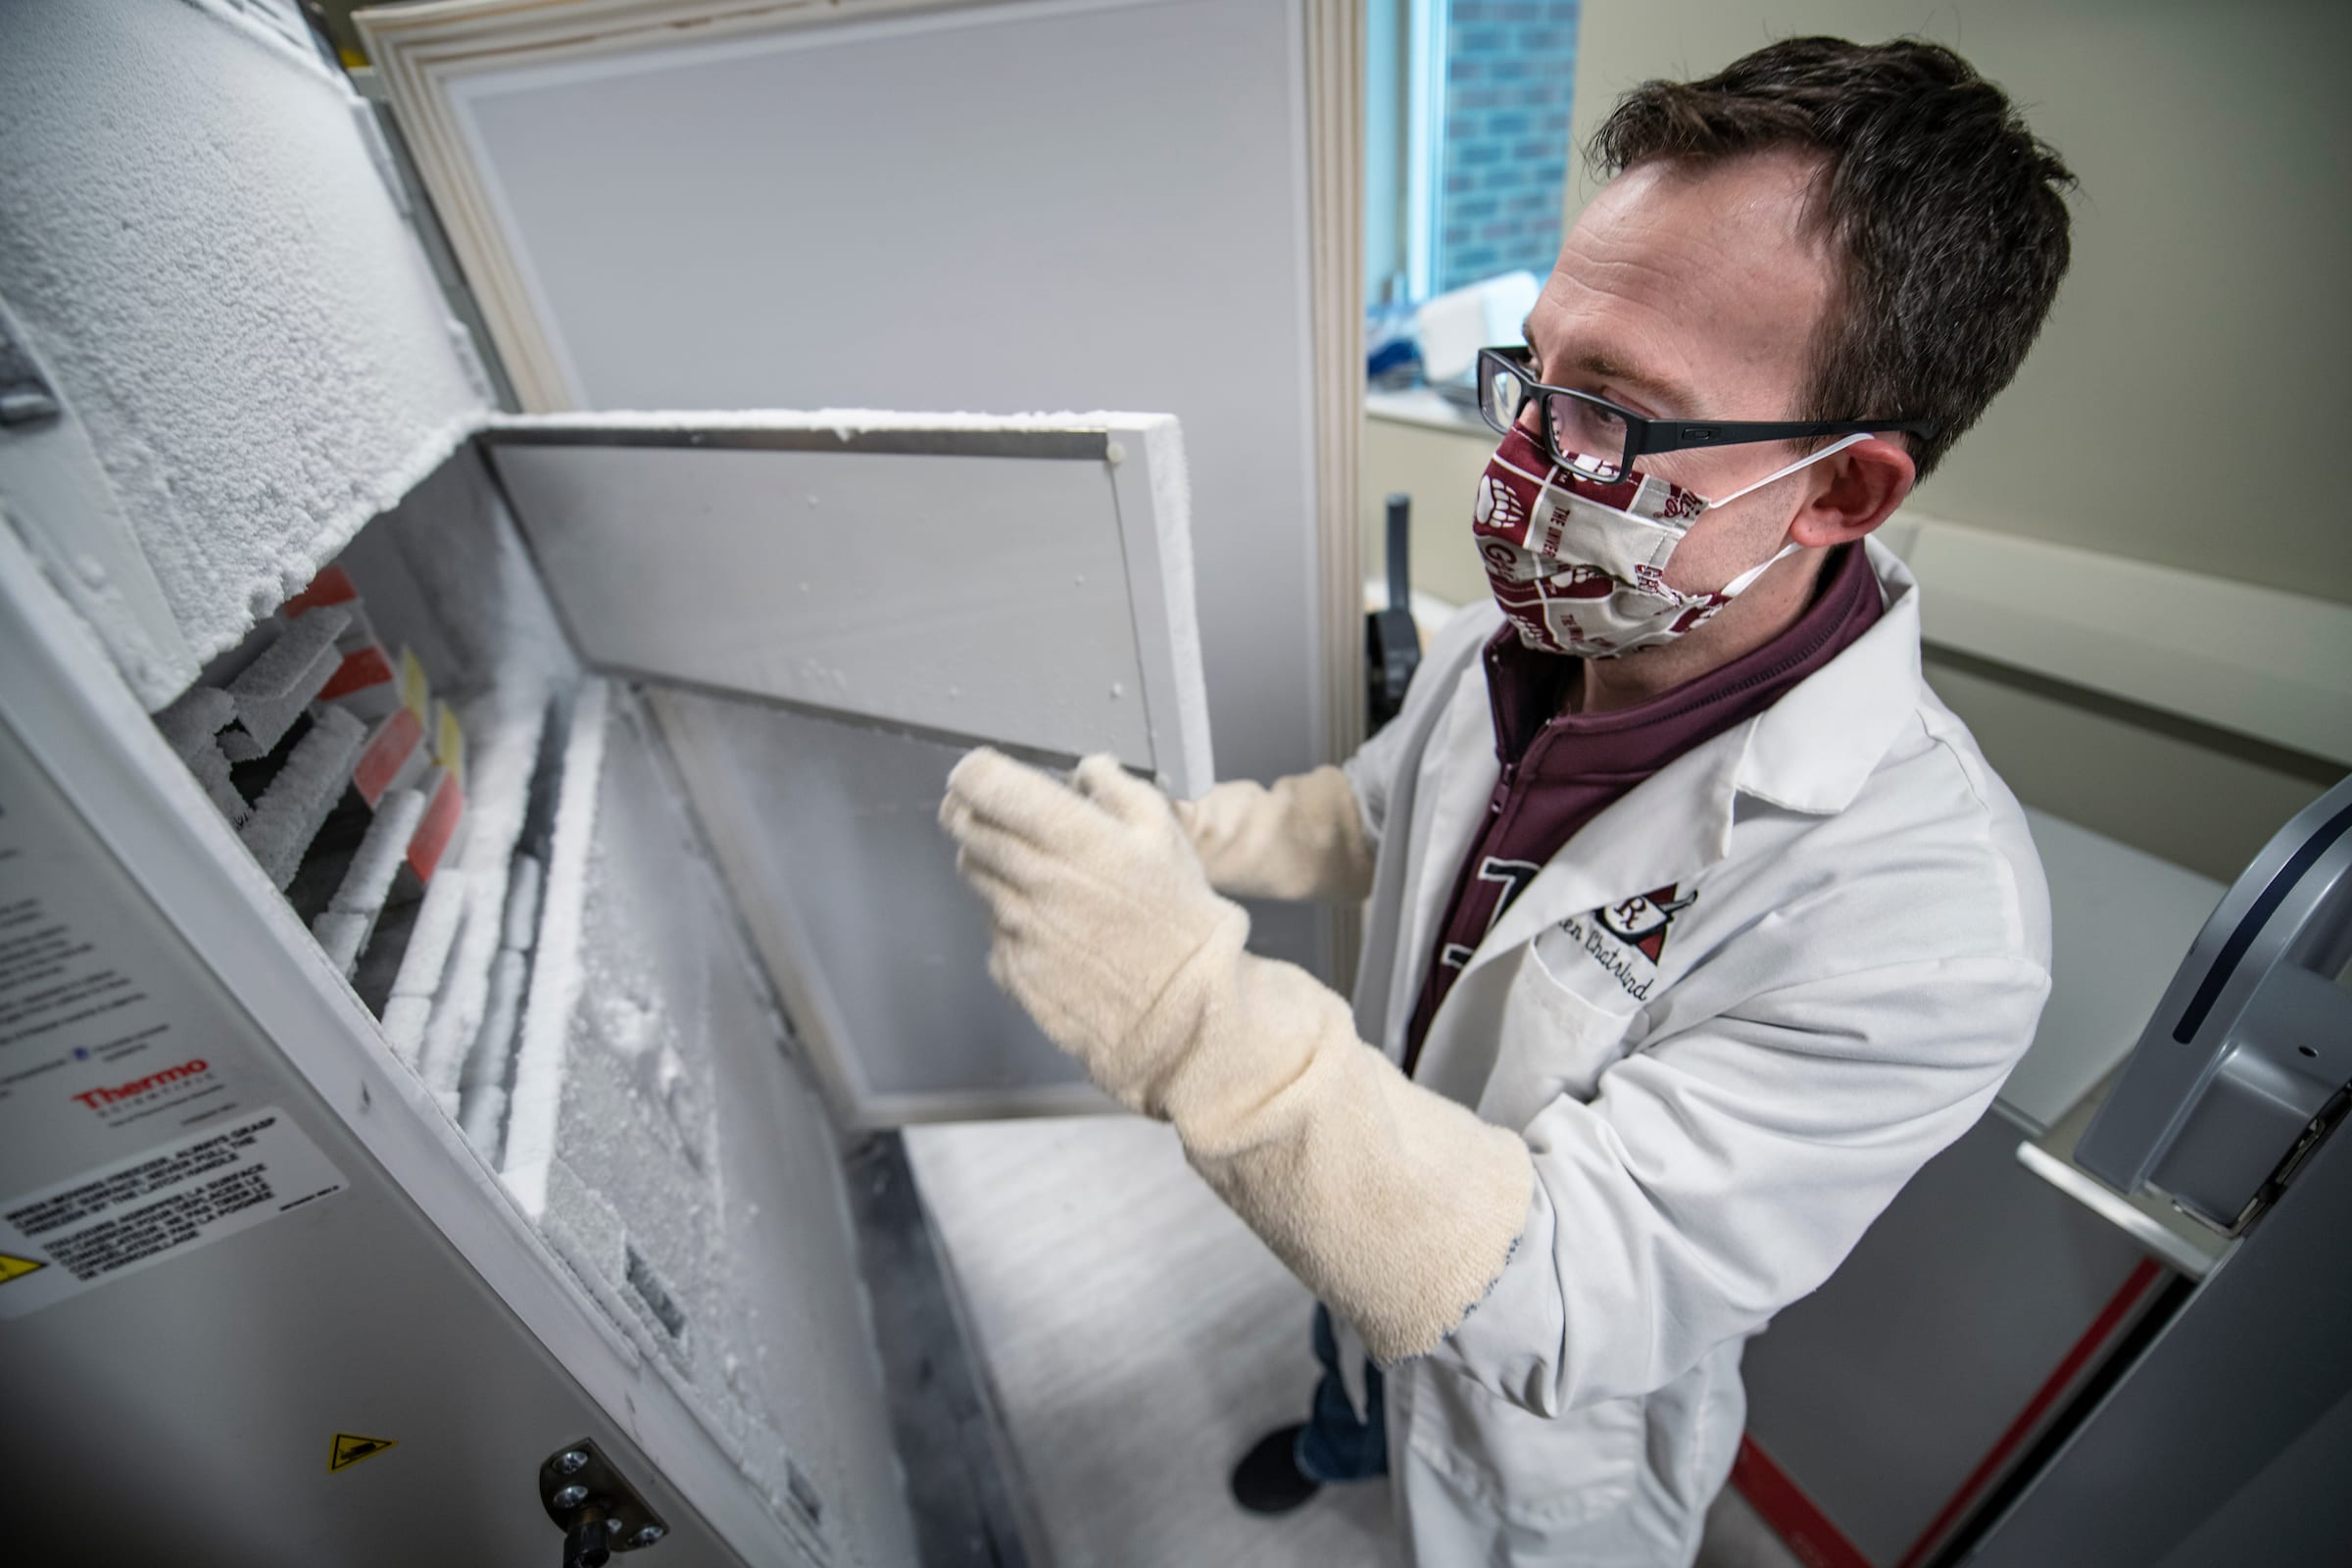 Curry pharmacy manager Ken Chatriand prepares one of three freezers for storing Covid vaccines at the University of Montana.